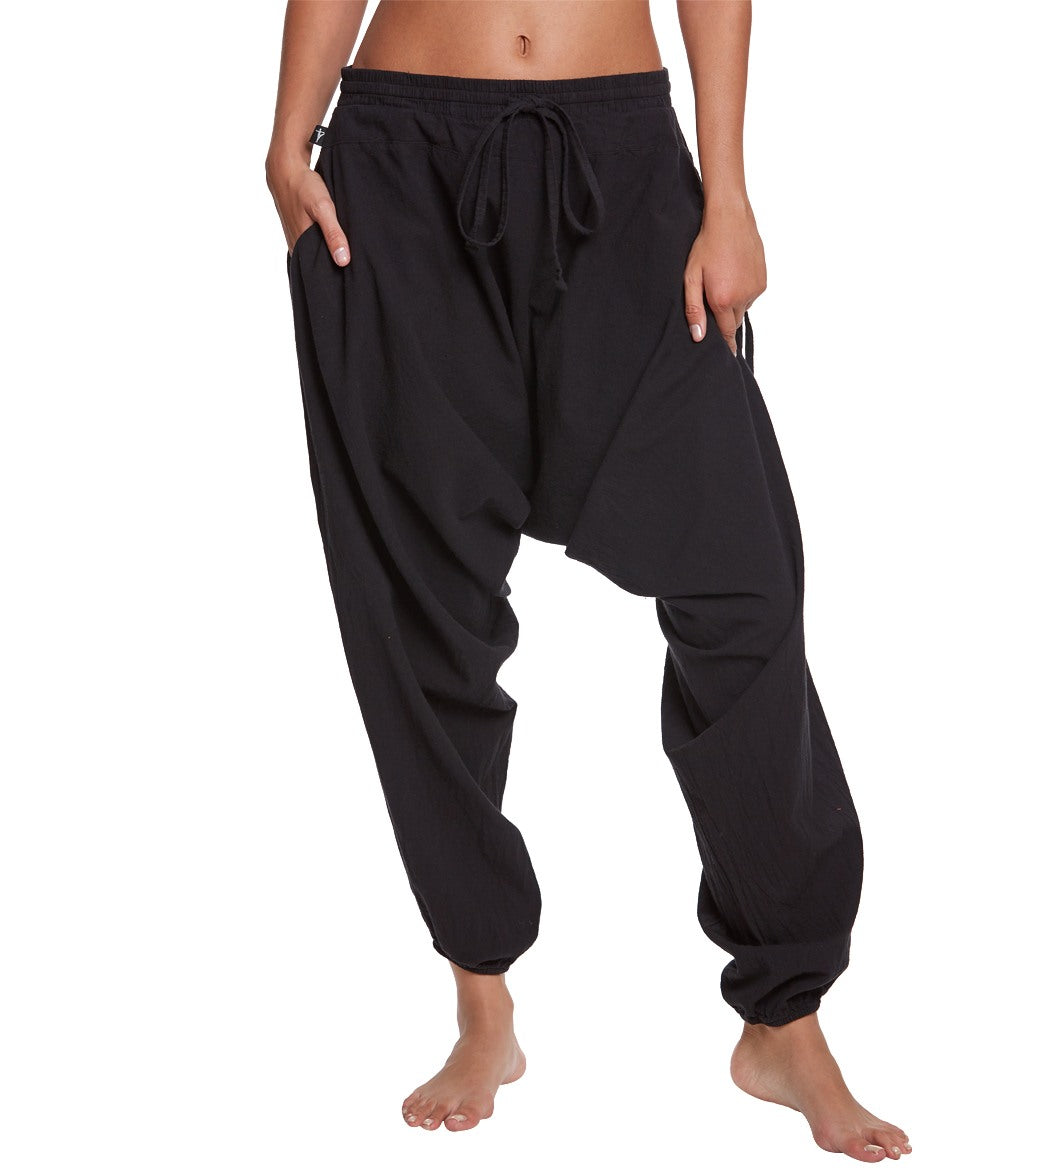 Buddha Pants - Must have turquoise winter pants! Only $39 10 days